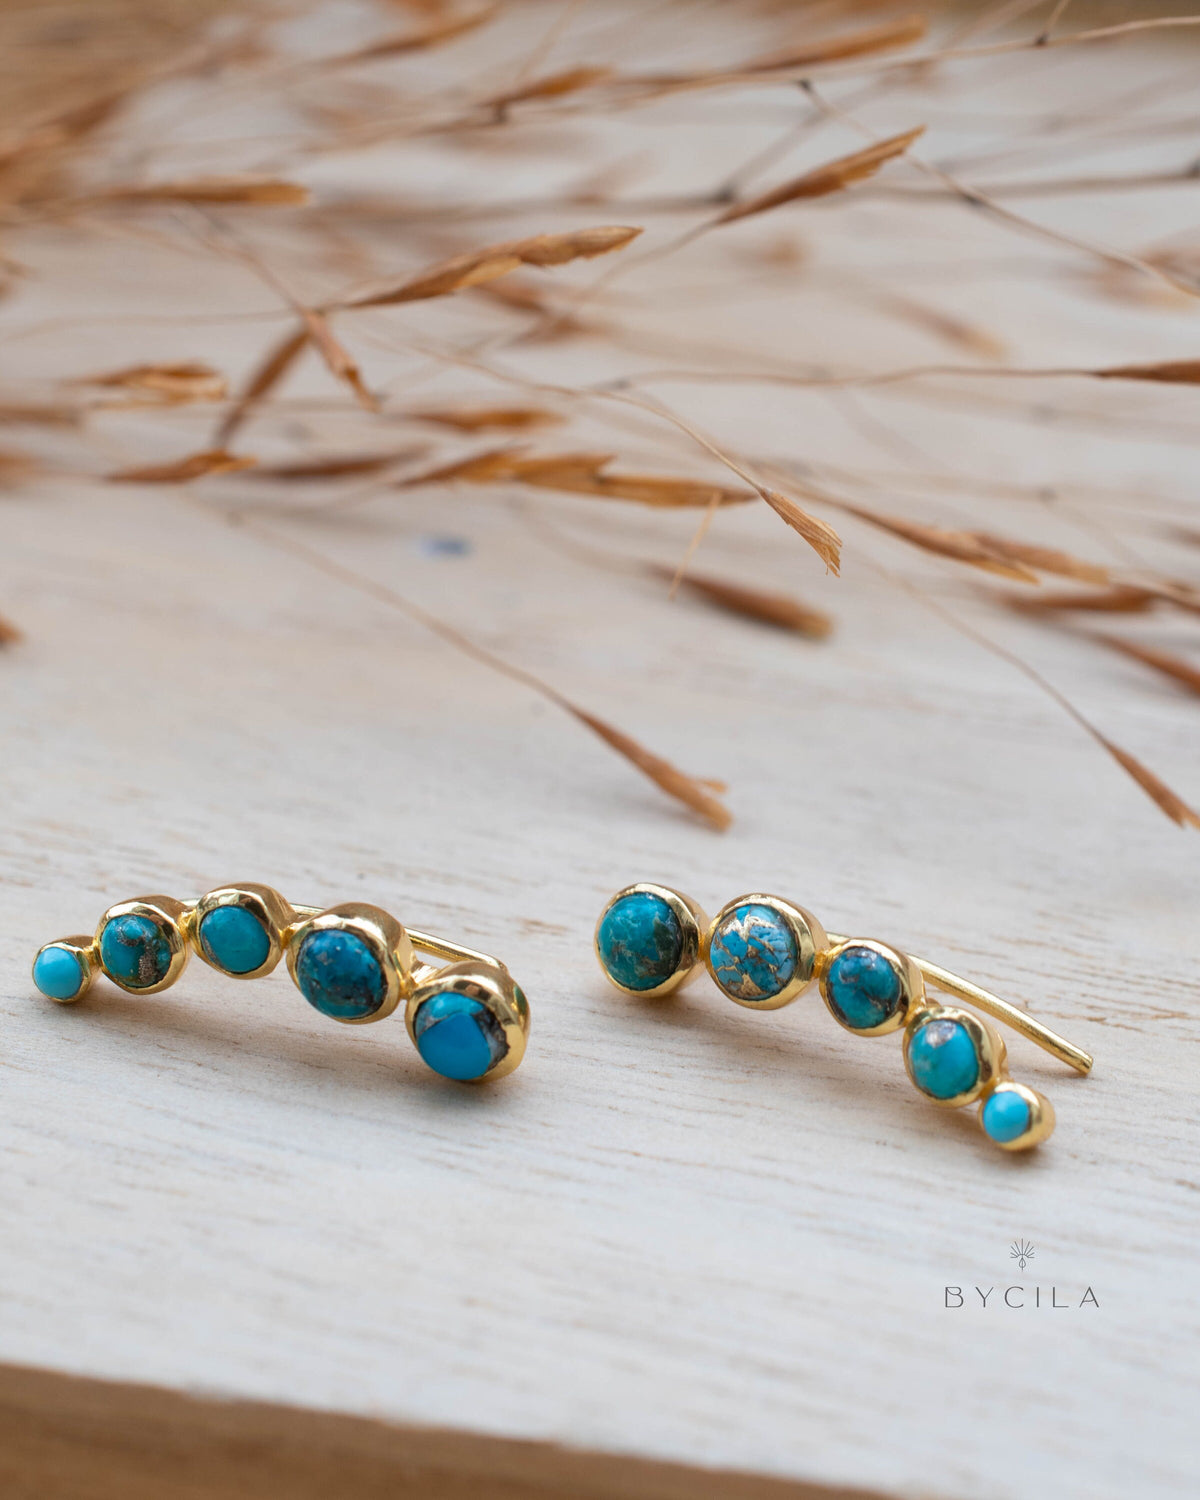 Copper Turquoise Ear Climber Earrings* Gold Plated 18k * Post * Statement *Everyday *Lightweight * bohemian * ByCila * BJE257